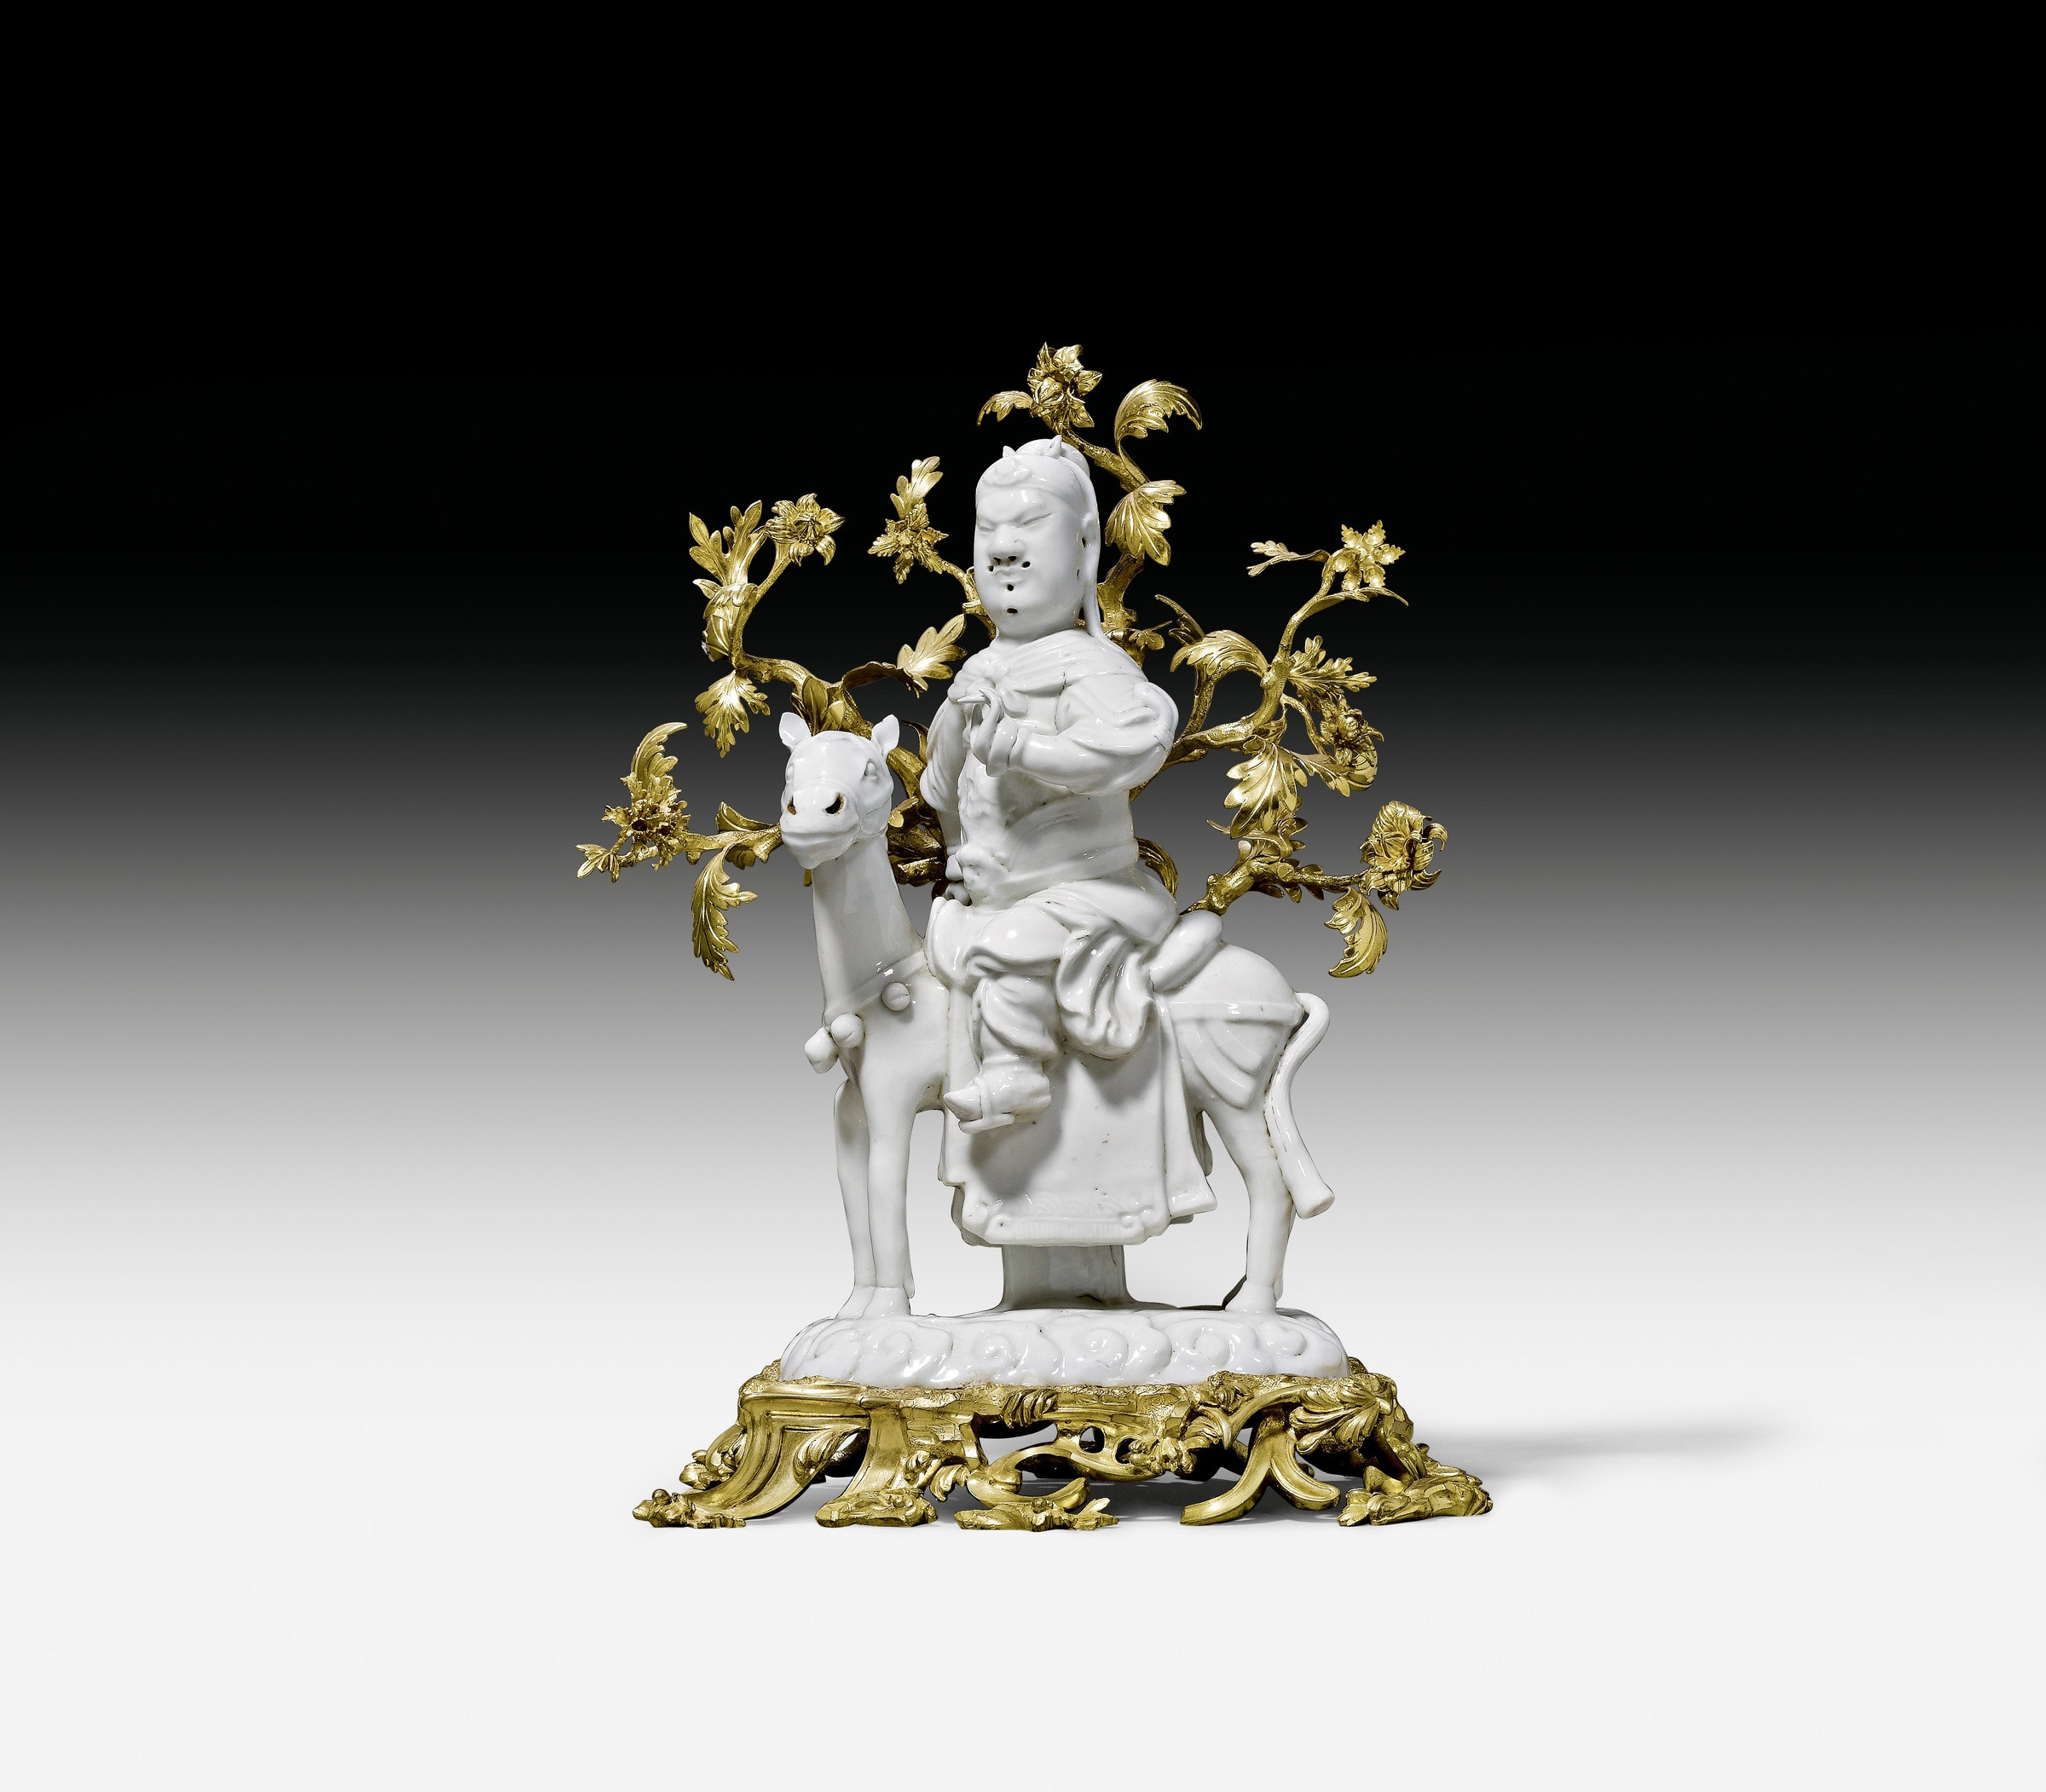 Chinese Bronze Vase Shapes Of Unknown A Kangxi Figure Of Guan Di Seated On His Horse the In A Kangxi Figure Of Guan Di Seated On His Horse